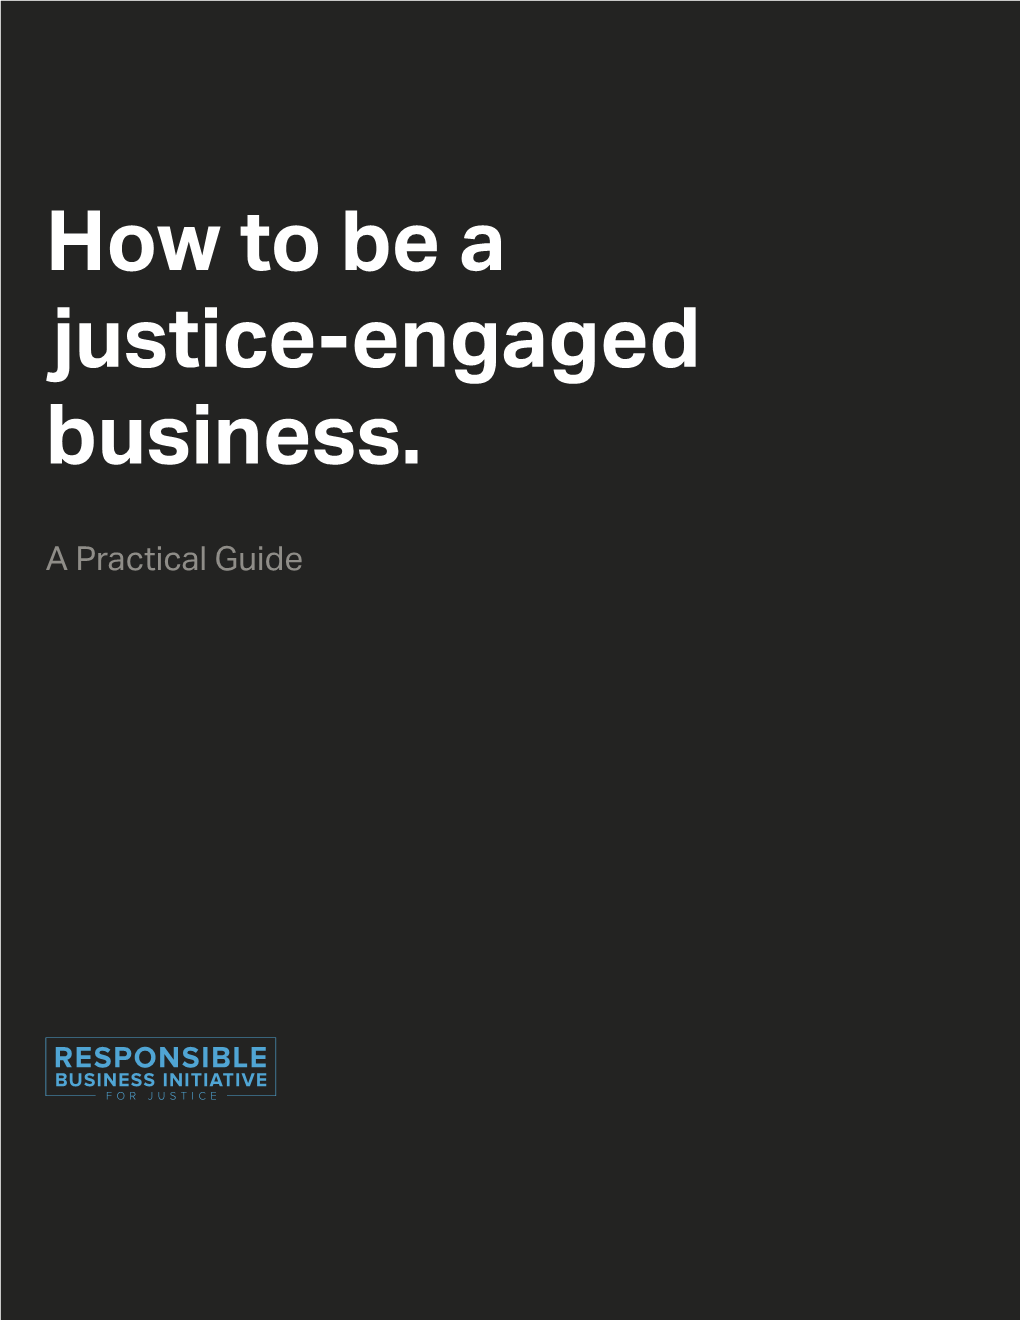 How to Be a Justice-Engaged Business